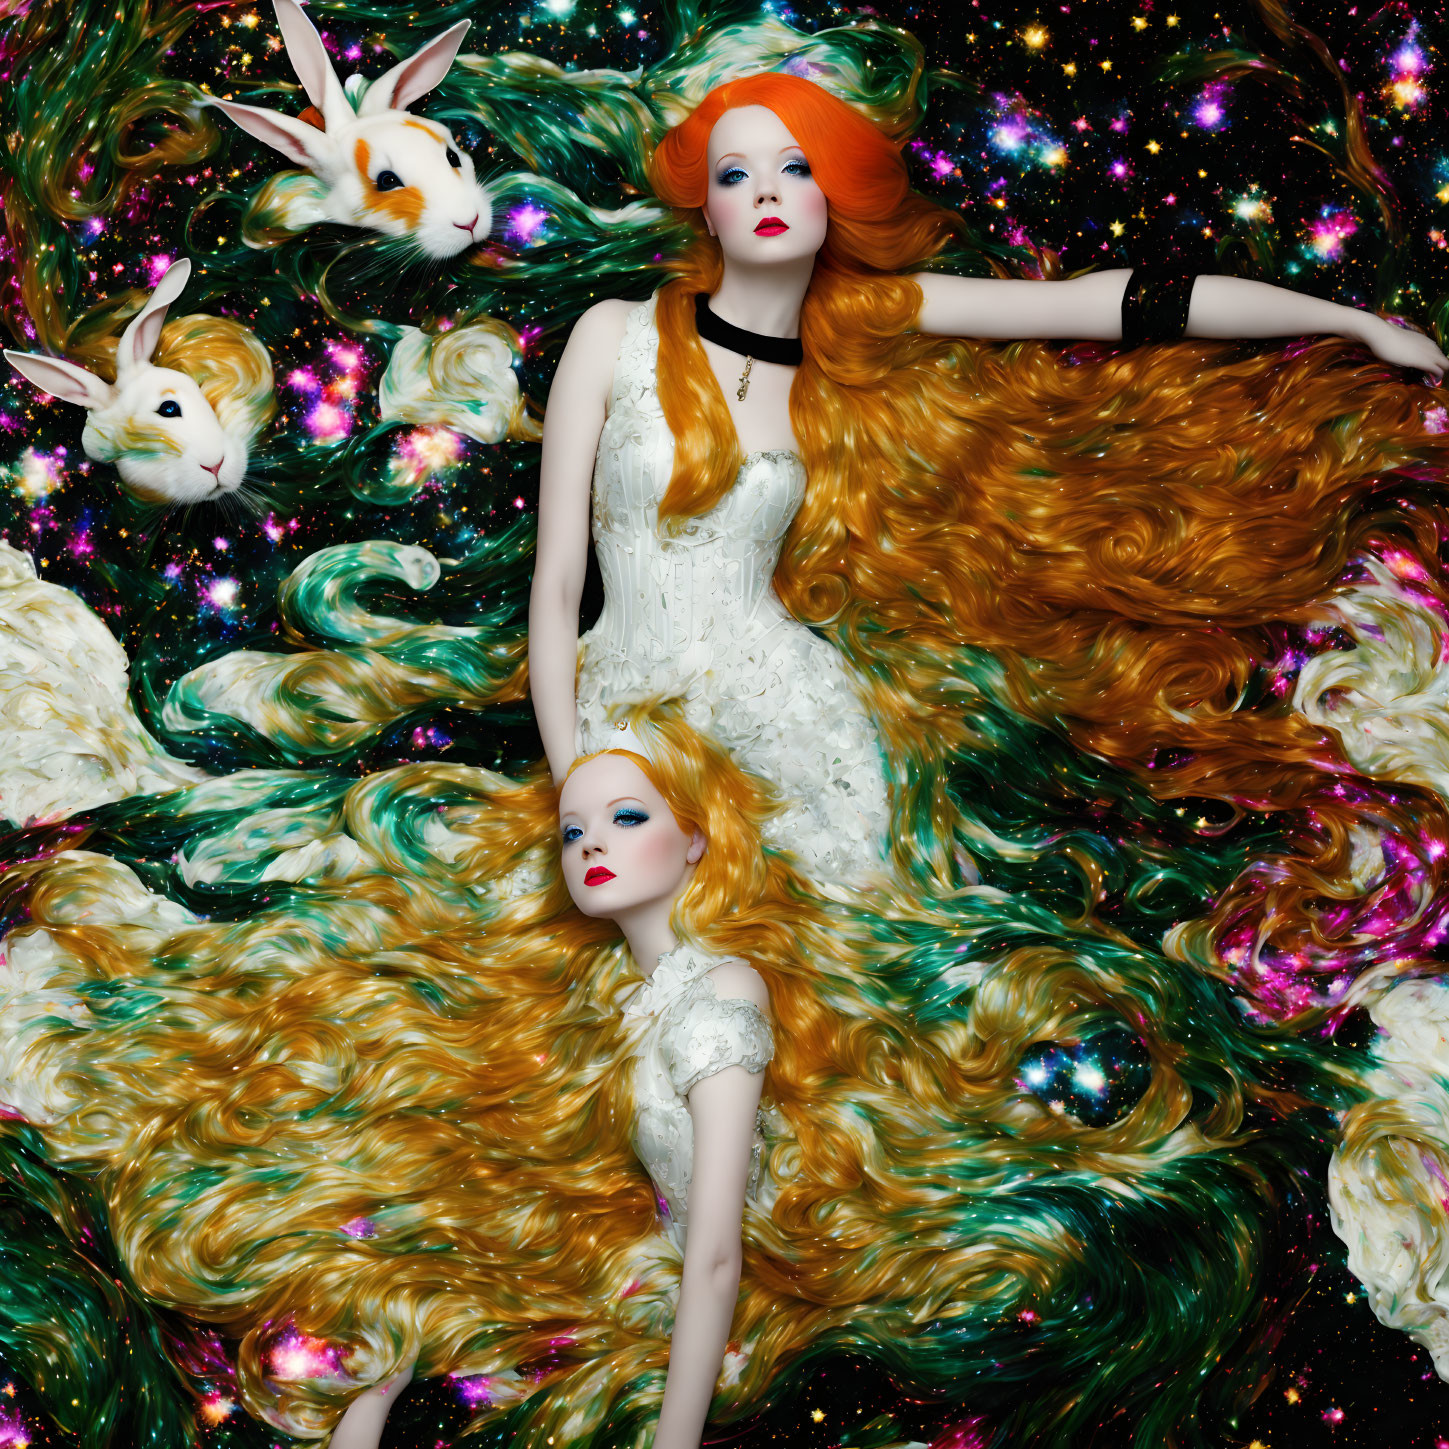 Surreal portrait of woman with red hair, rabbits, cosmic background